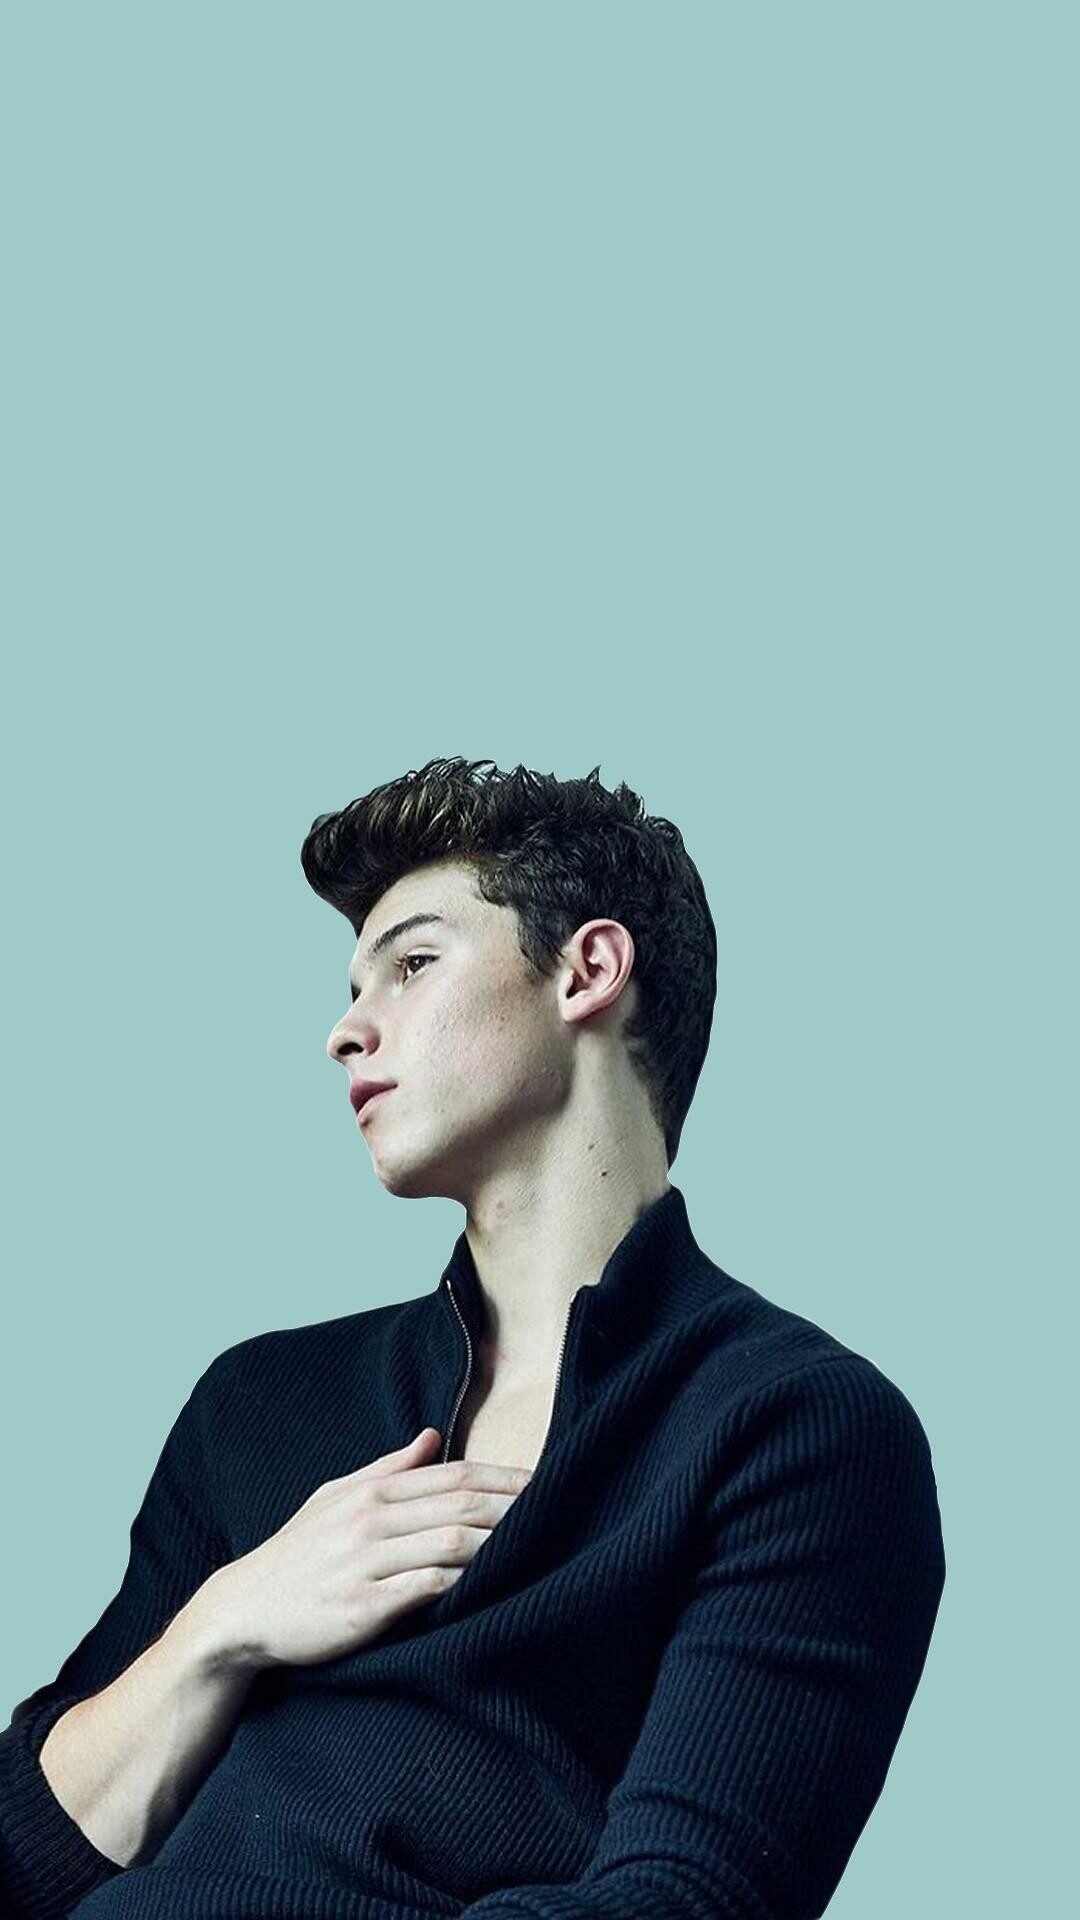 Shawn Mendes: "Youth", featuring American singer Khalid, was released on May 3, 2018. 1080x1920 Full HD Wallpaper.